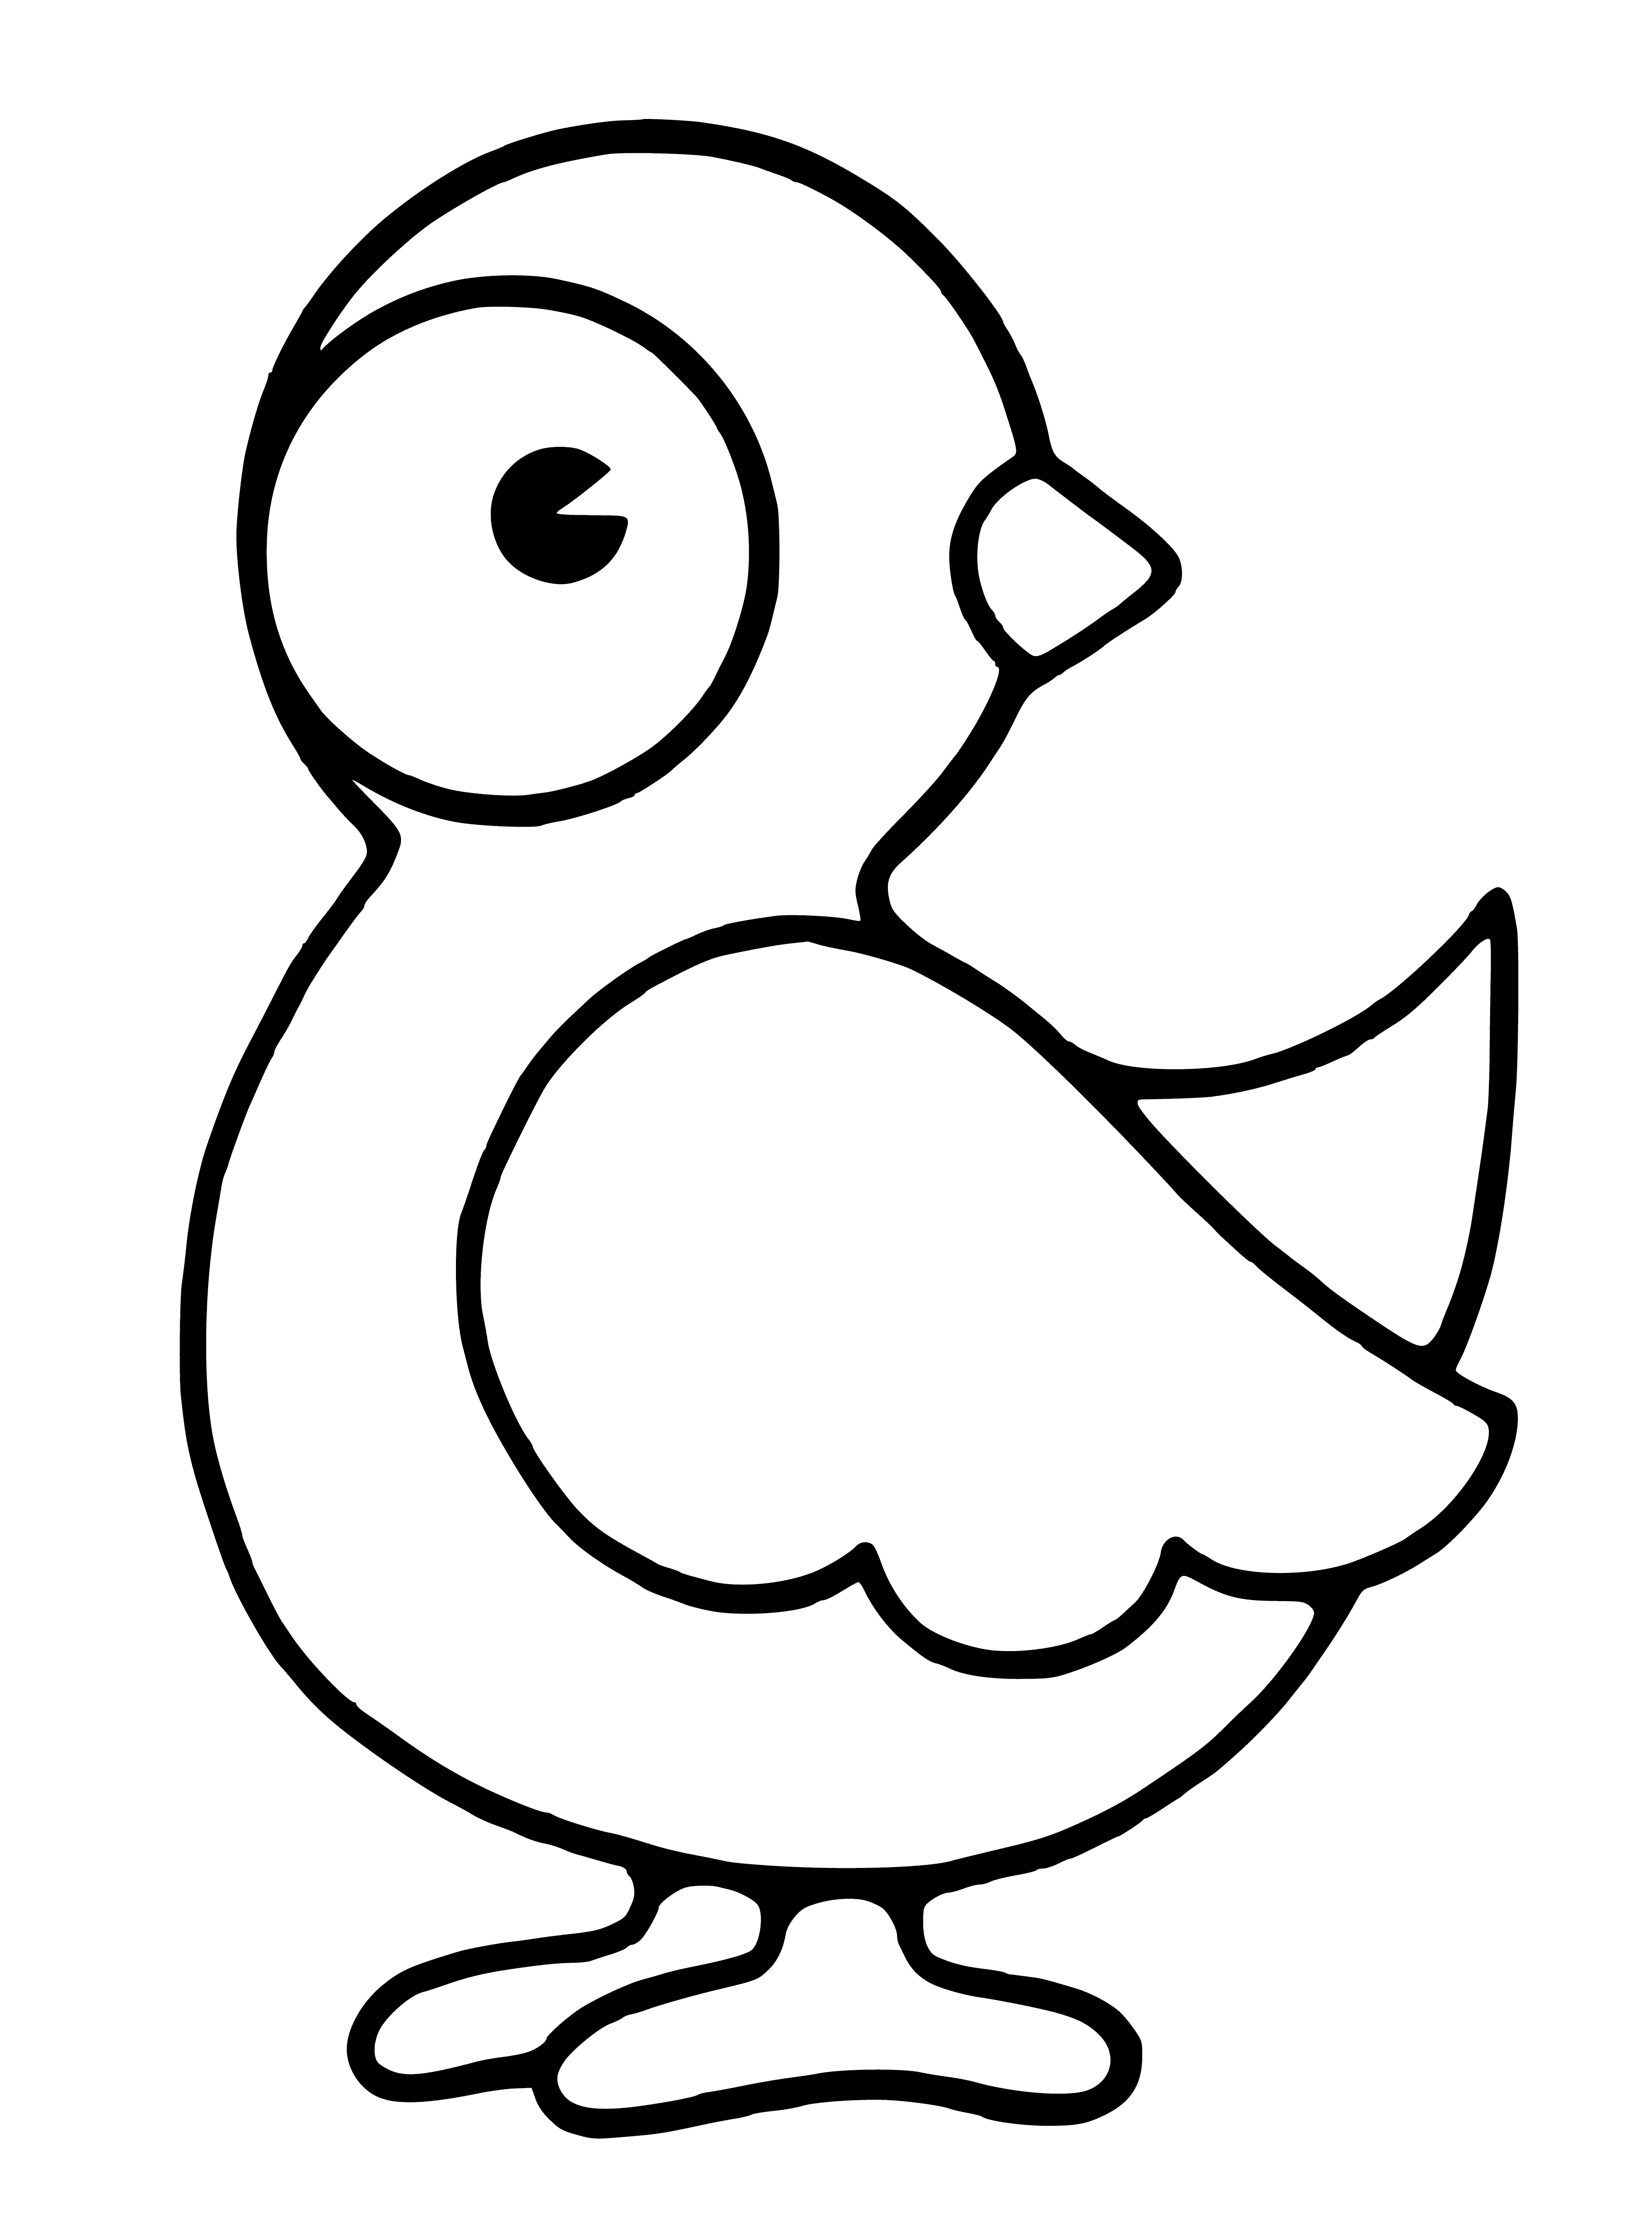 coloring page: A yellow chick with orange feet is in the center of a green background.